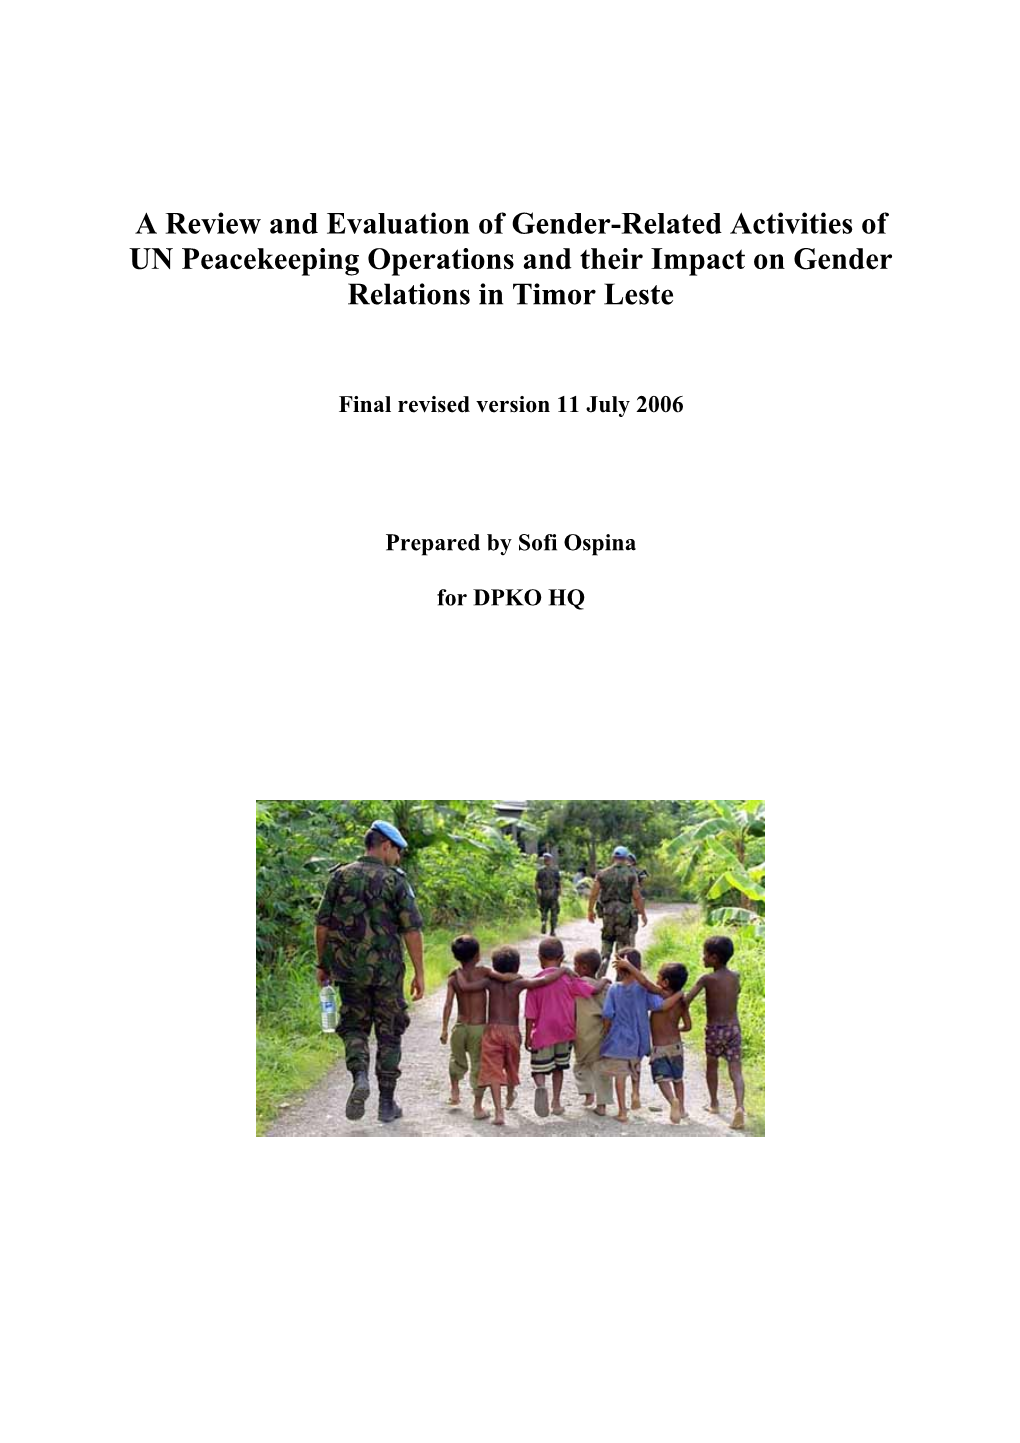 A Review and Evaluation of Gender-Related Activities of UN Peacekeeping Operations and Their Impact on Gender Relations in Timor Leste